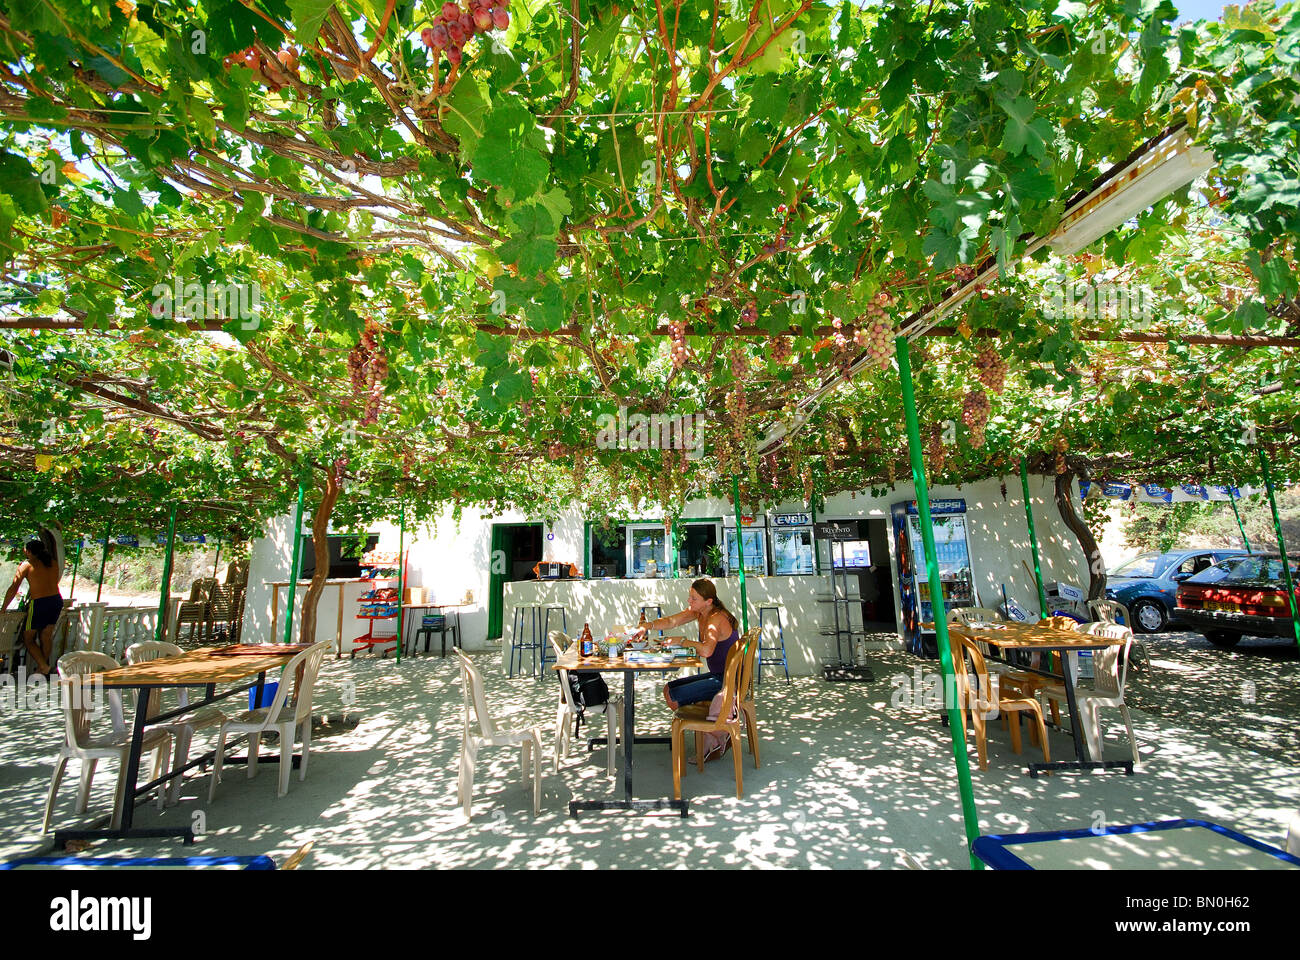 NORTH CYPRUS. The Asmali Plaj restaurant at Yesilirmak (Limnitis) beach, with its world-record largest vine on the terrace. 2009 Stock Photo